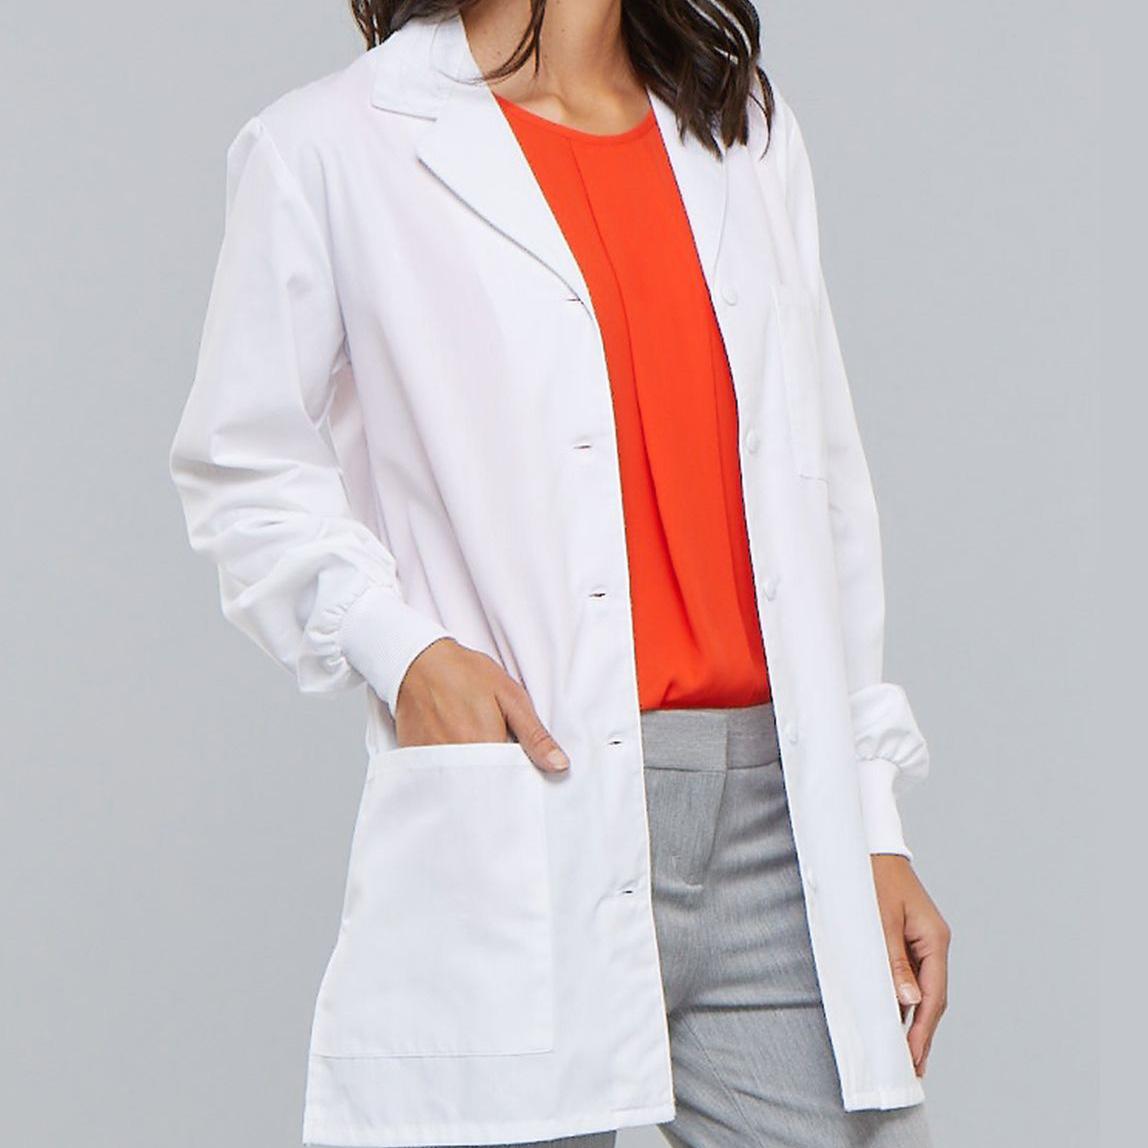 Where To Buy Lab Coats In Singapore